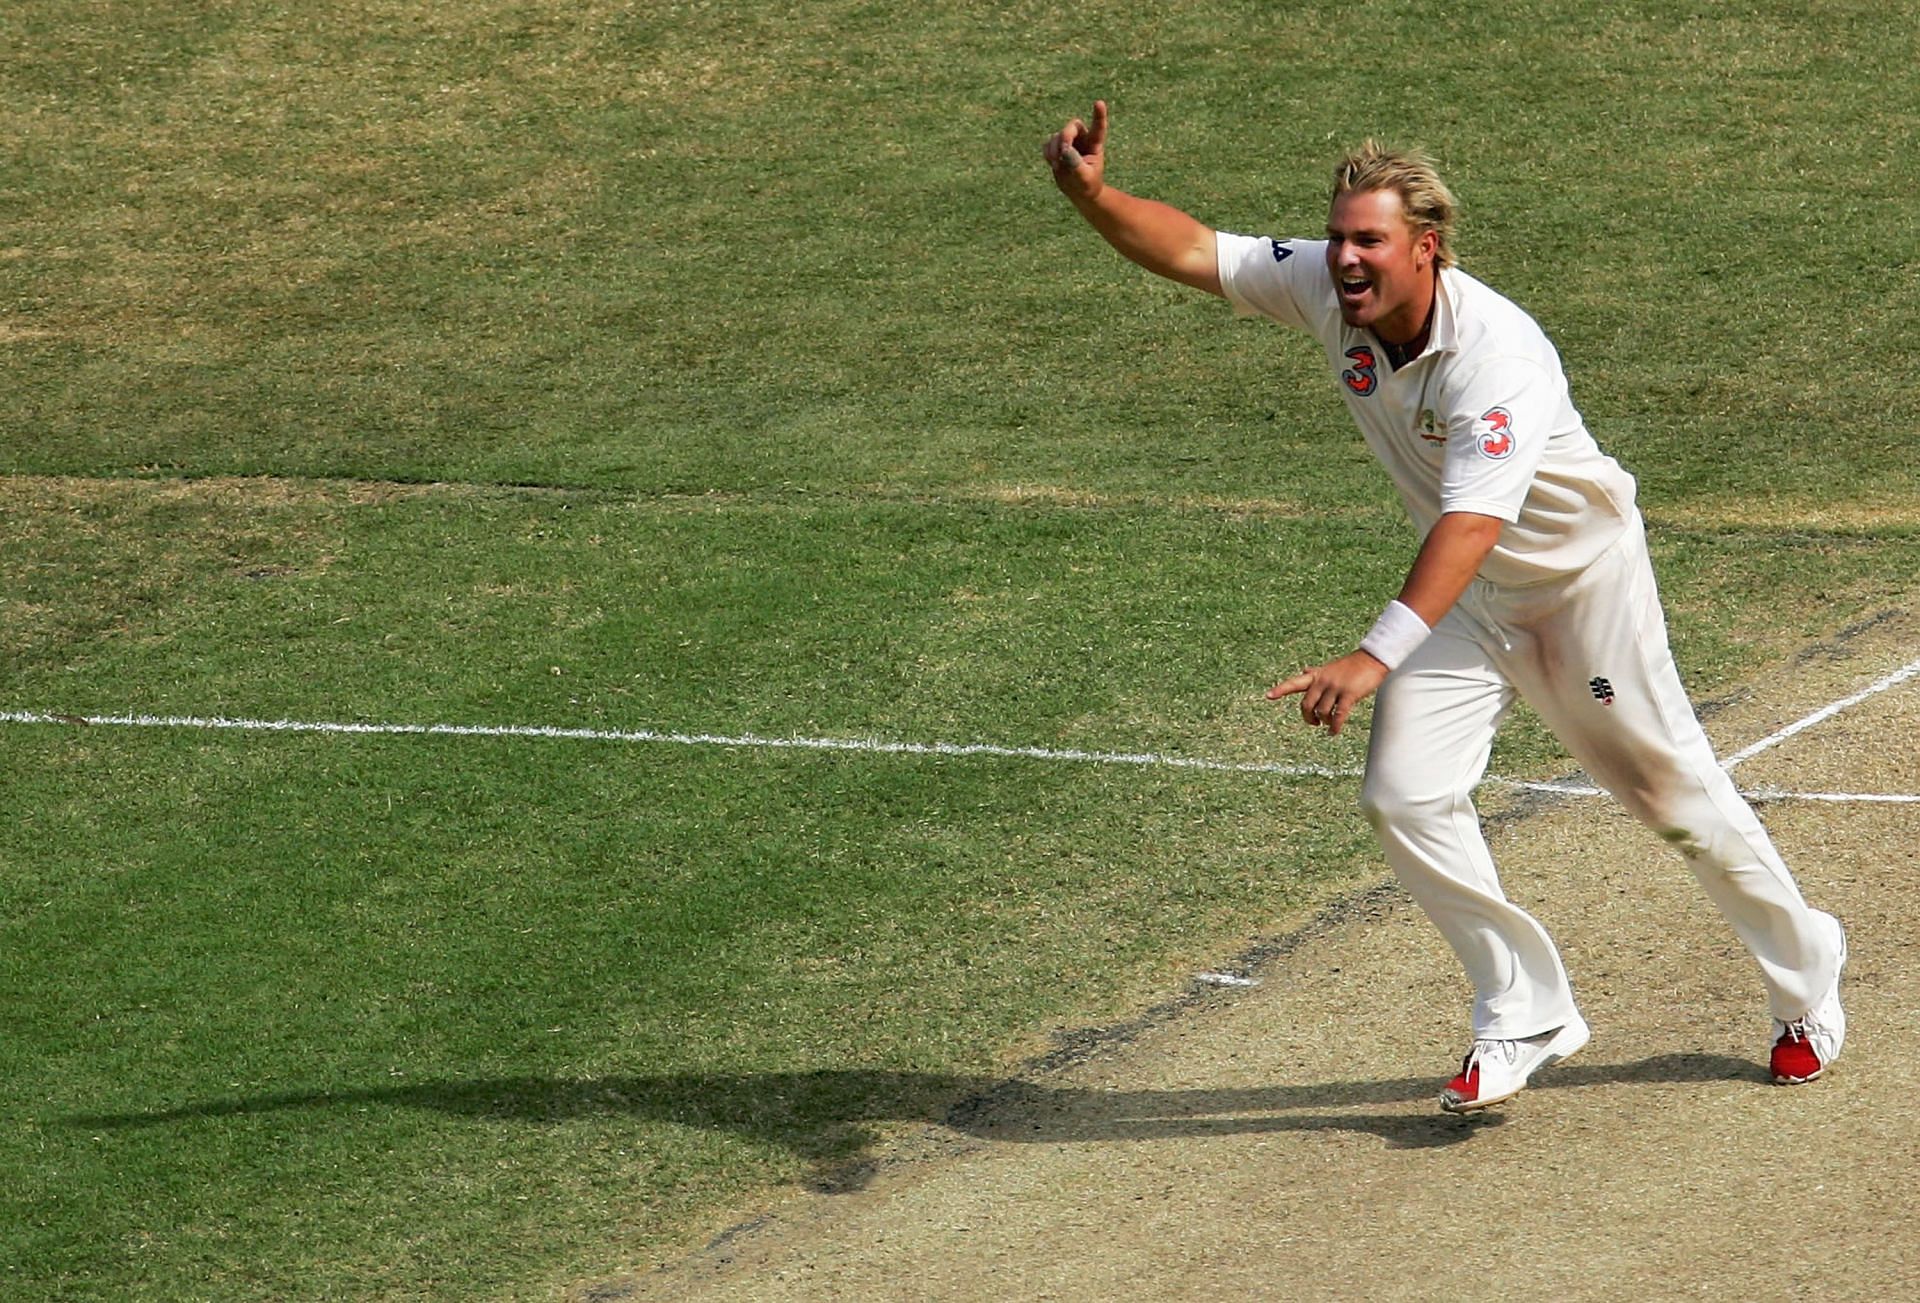 Shane Warne during Second Test - Australia v Pakistan: Day 1 2004 [Getty Images]